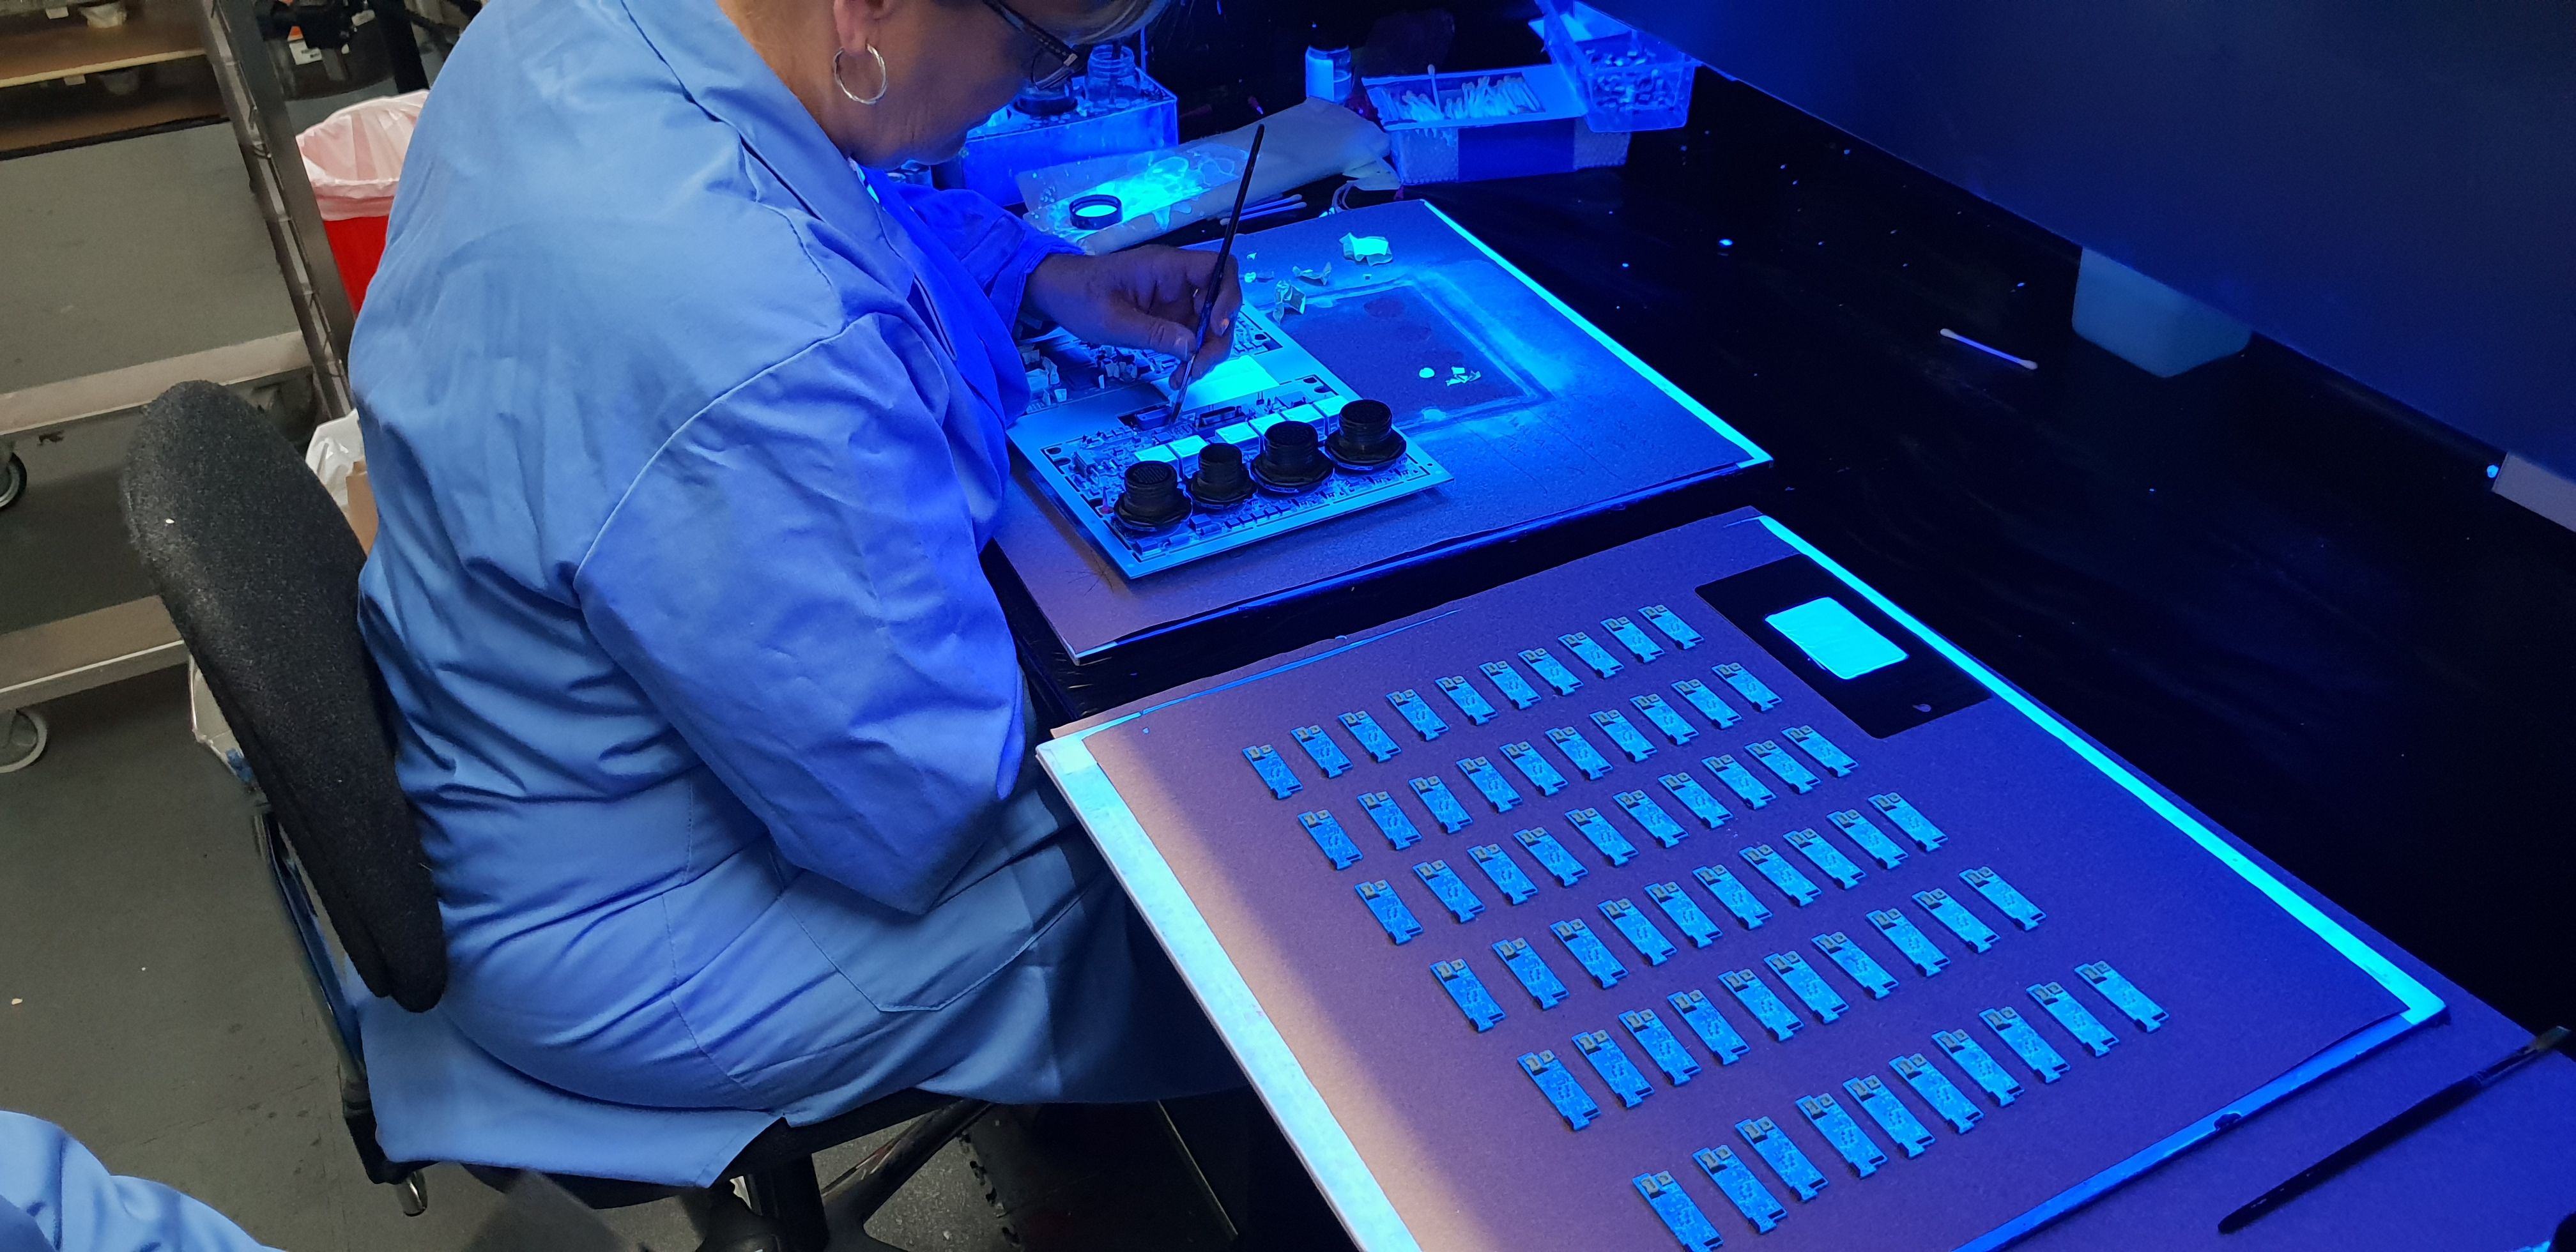 What standard should I be using for application and inspection of conformal coating?